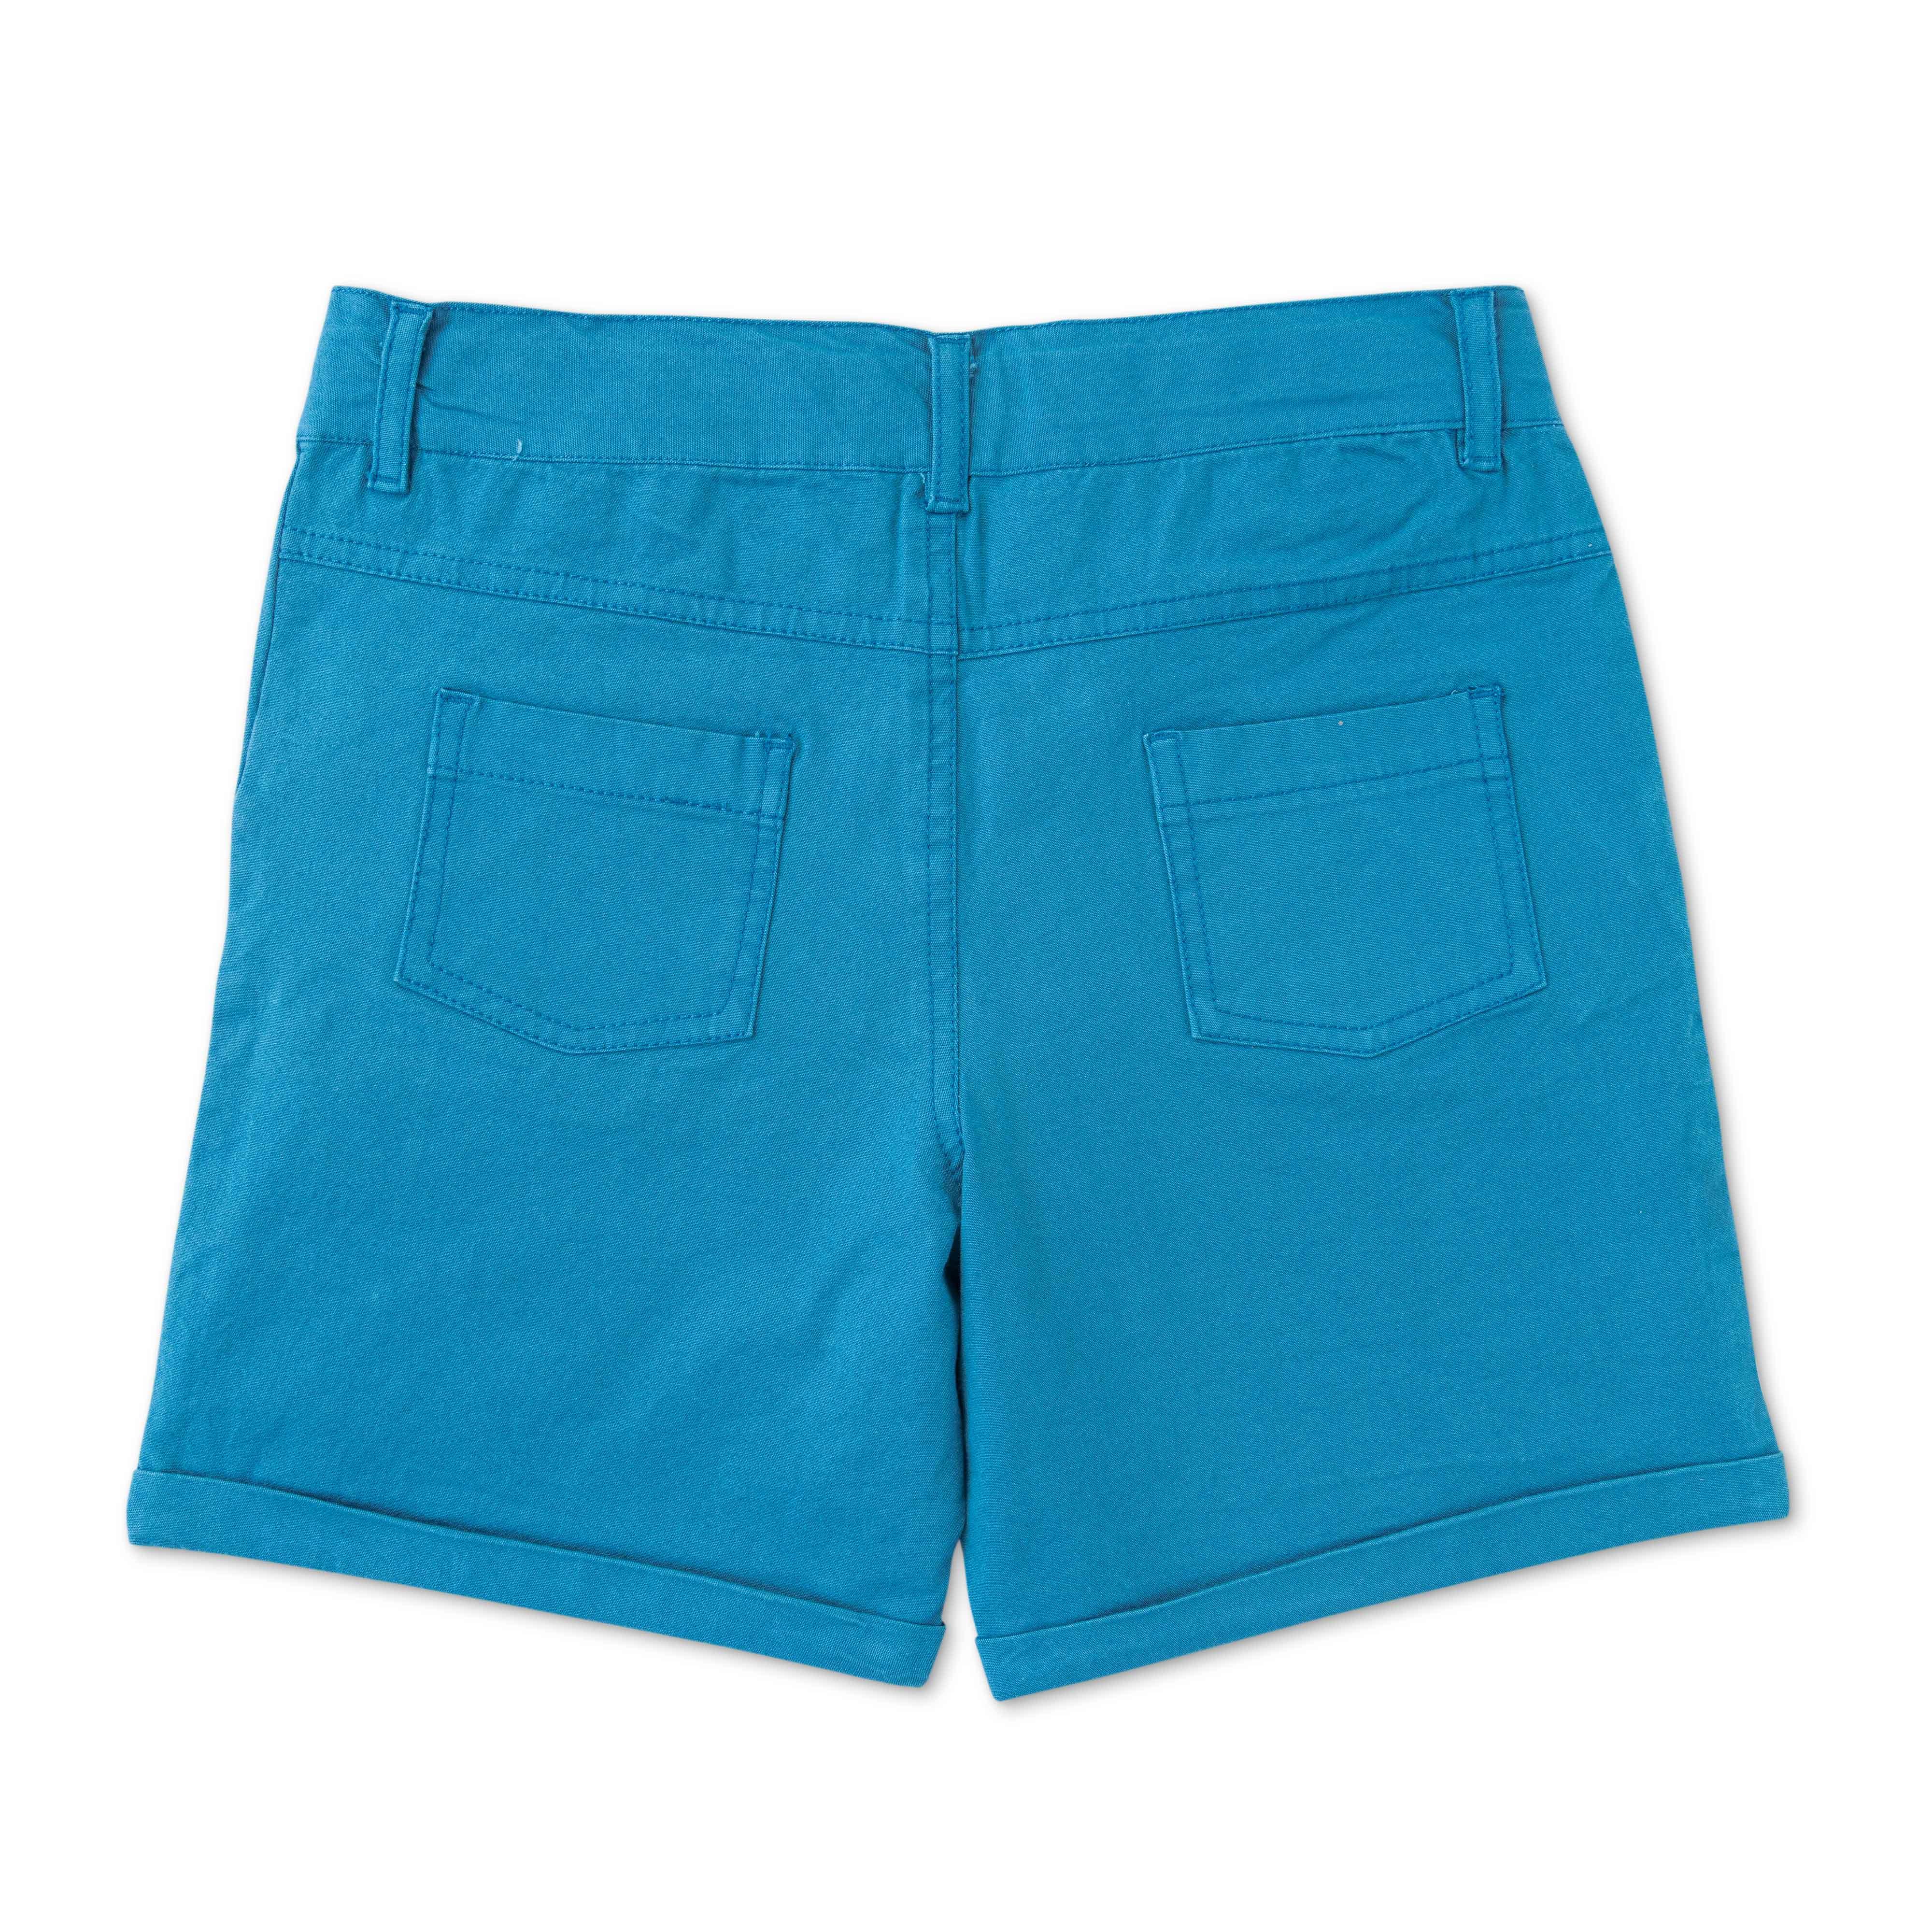 Boys Cotton Toddlers Solid Shorts - Aqua Blue - Juscubs